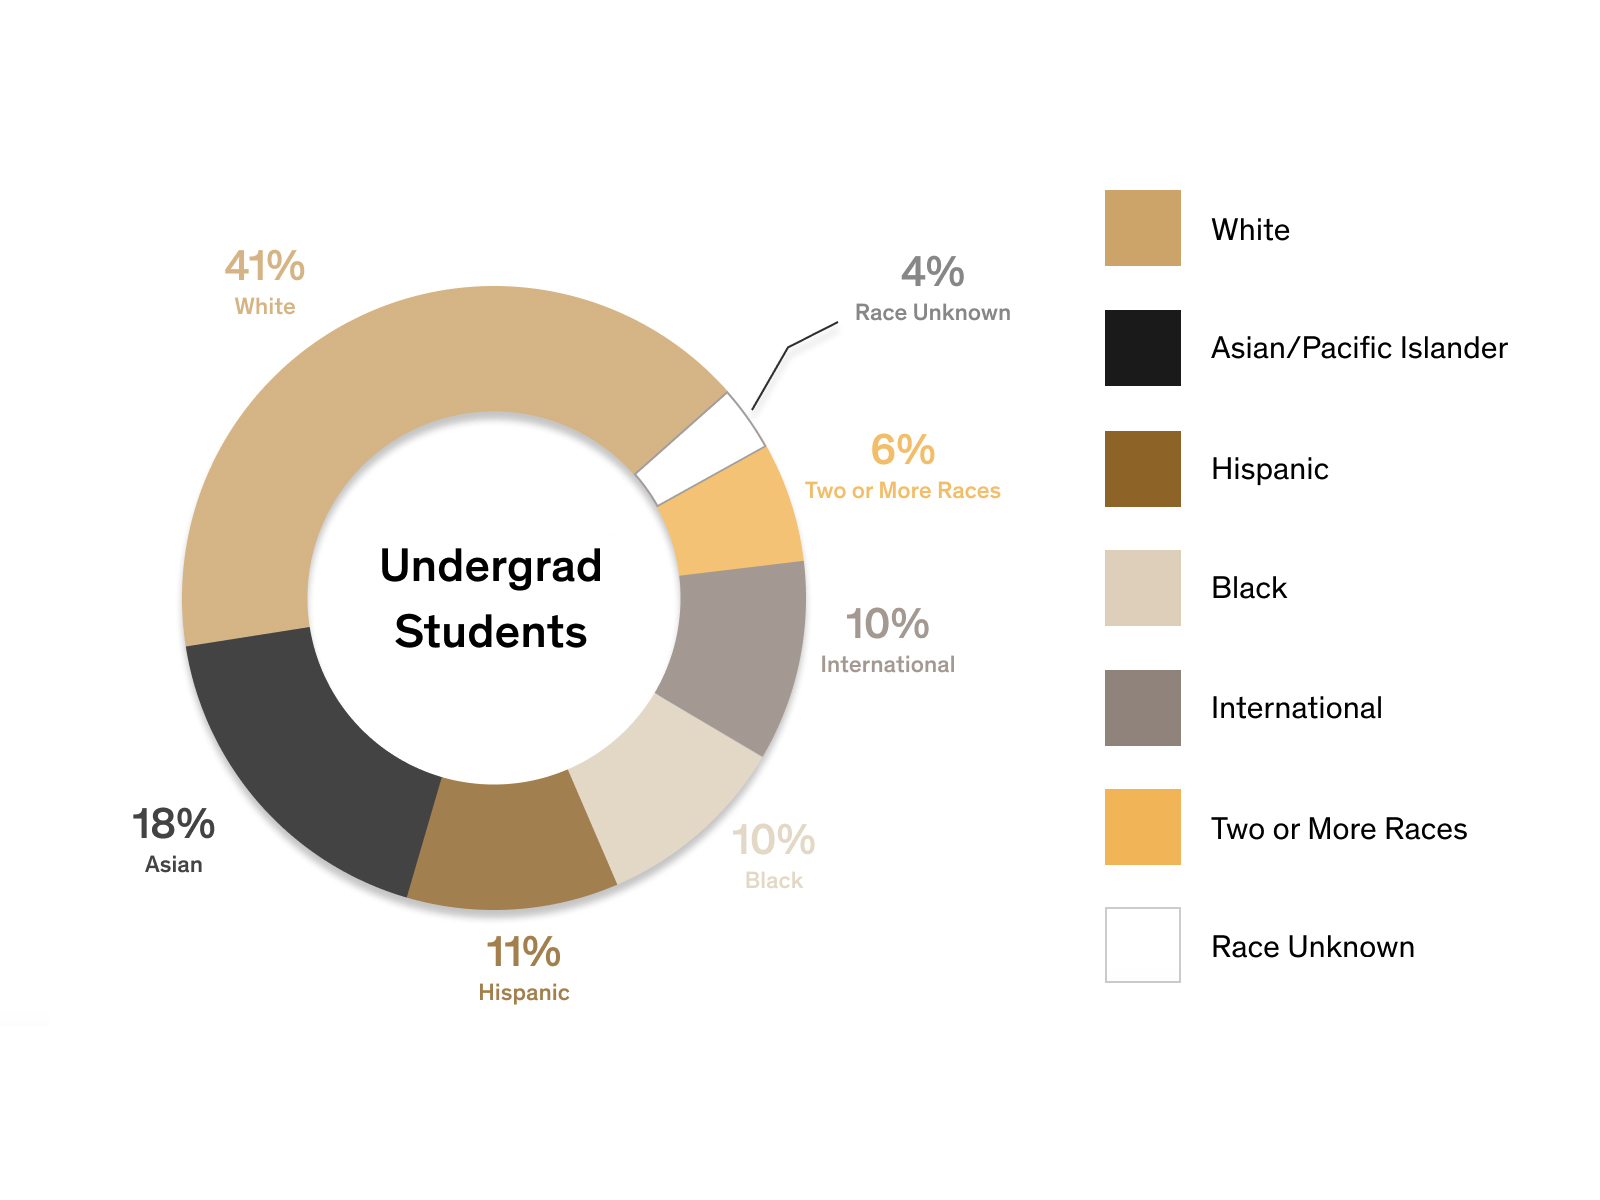 Race and ethnicity distribution among undergraduate students showing 41% white, 18% Asian, 11% Hispanic, 10% Black, 10% international, 6% two or more races and 4% race unknown